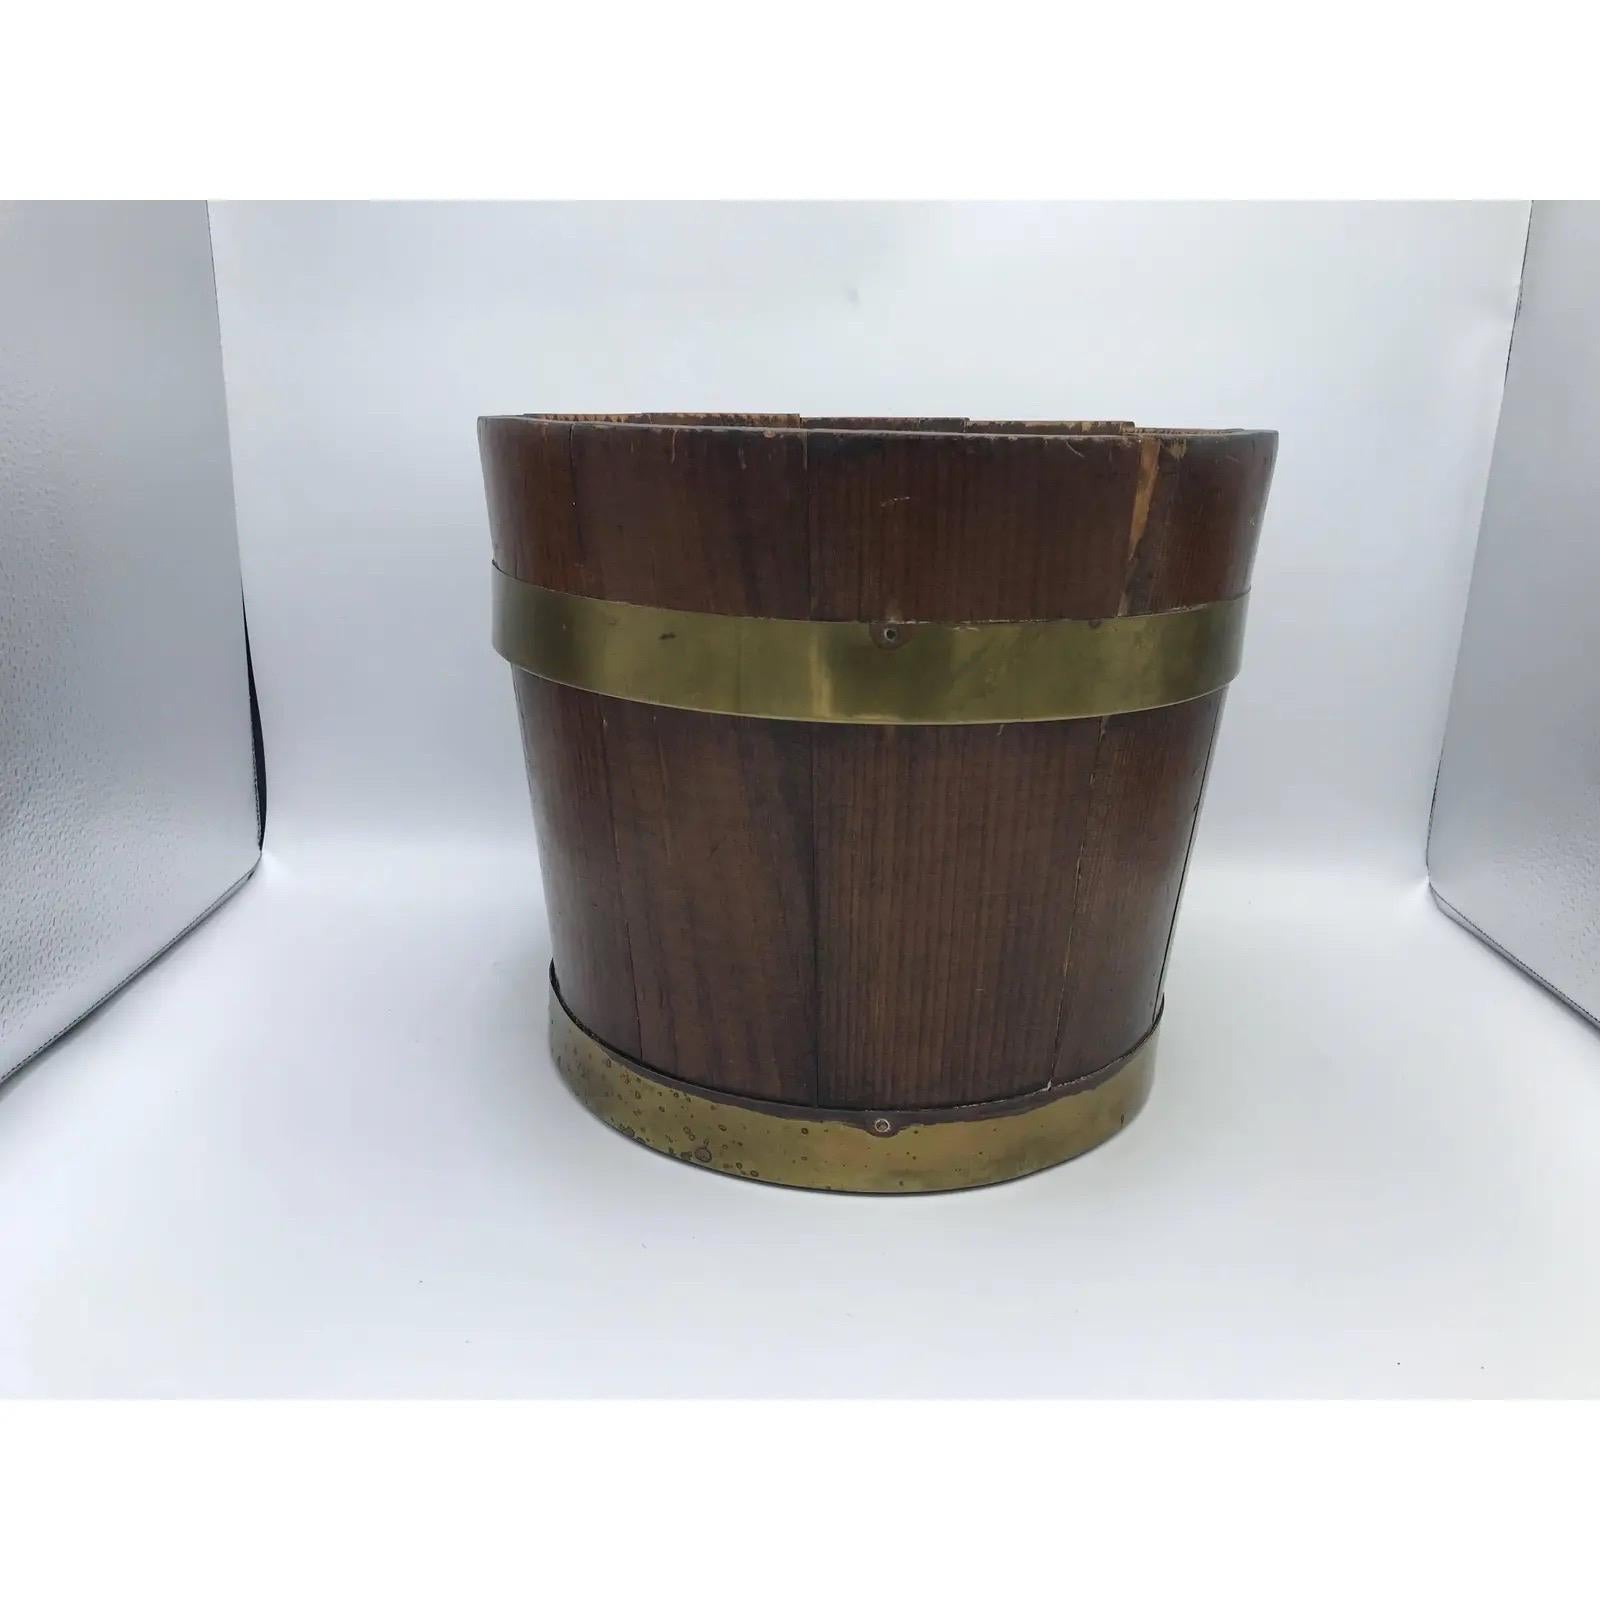 Offered is an exquisite, late 19th century English pine bucket with a brass banded collar. Could be used as a cachepot planter, centerpiece, or waste bin with appropriate liner. Lovely all-over patina to brass.